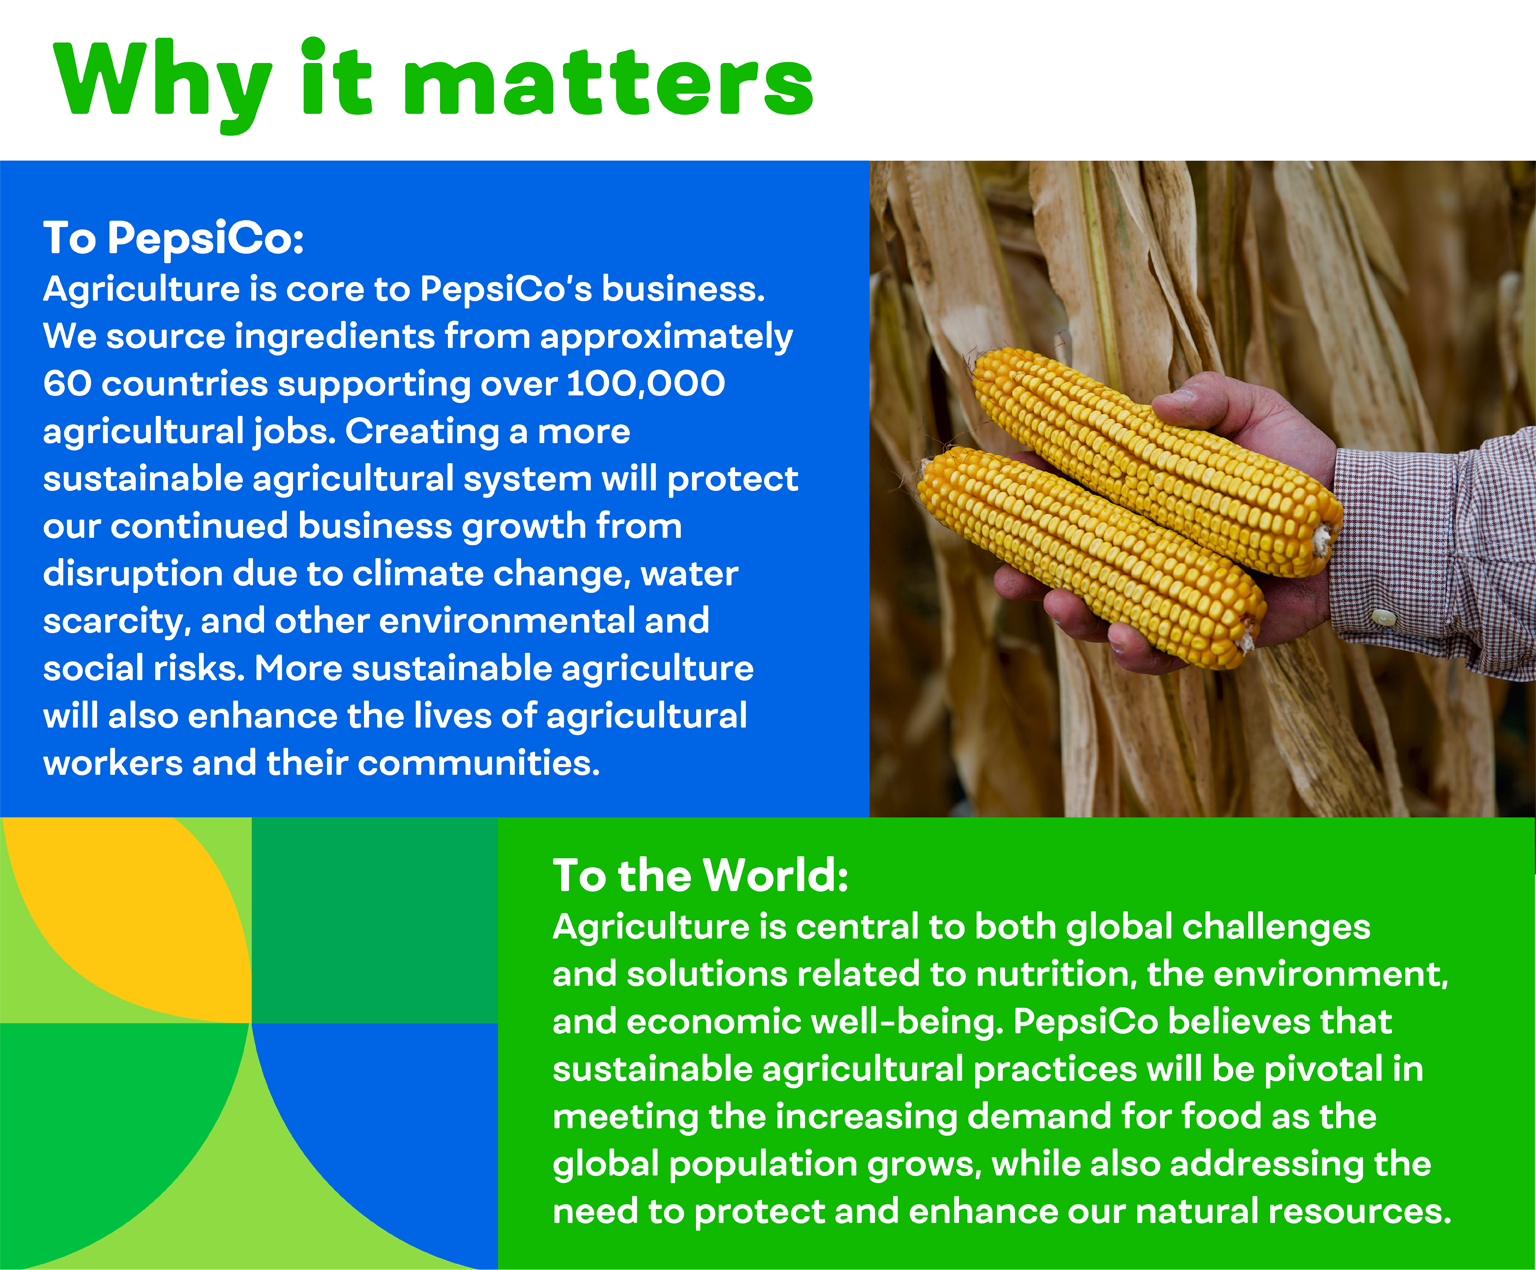 Why it matters to PepsiCo and the world: We source ingredients from approximately 60 countries supporting over 10,000 agricultural jobs. Agriculture is central to both global challenges and solutions.